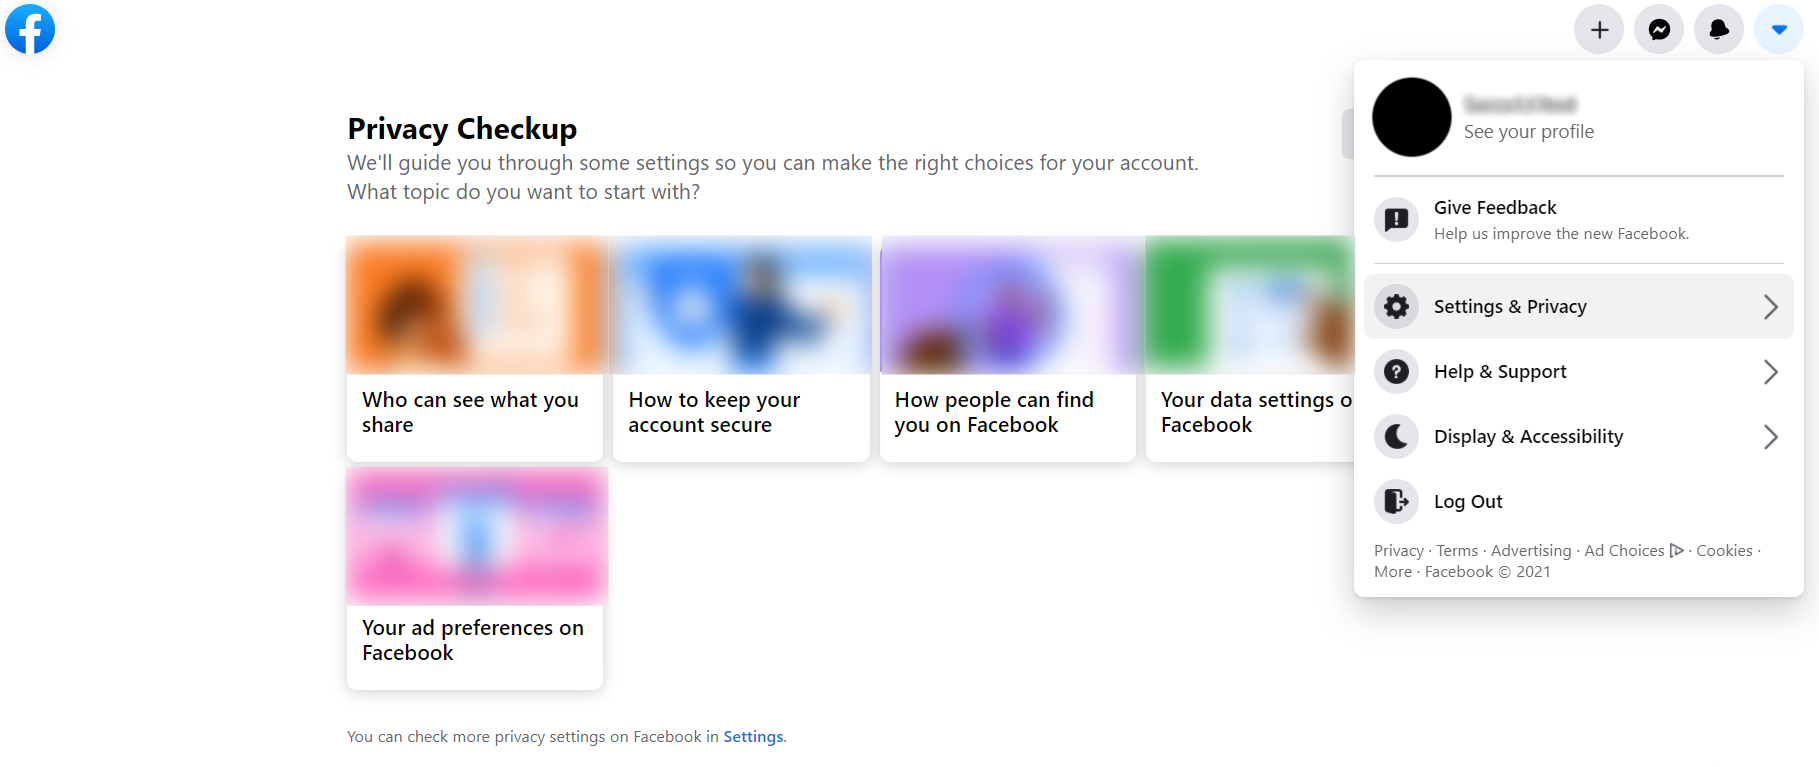 Facebook's privacy checkup feature.